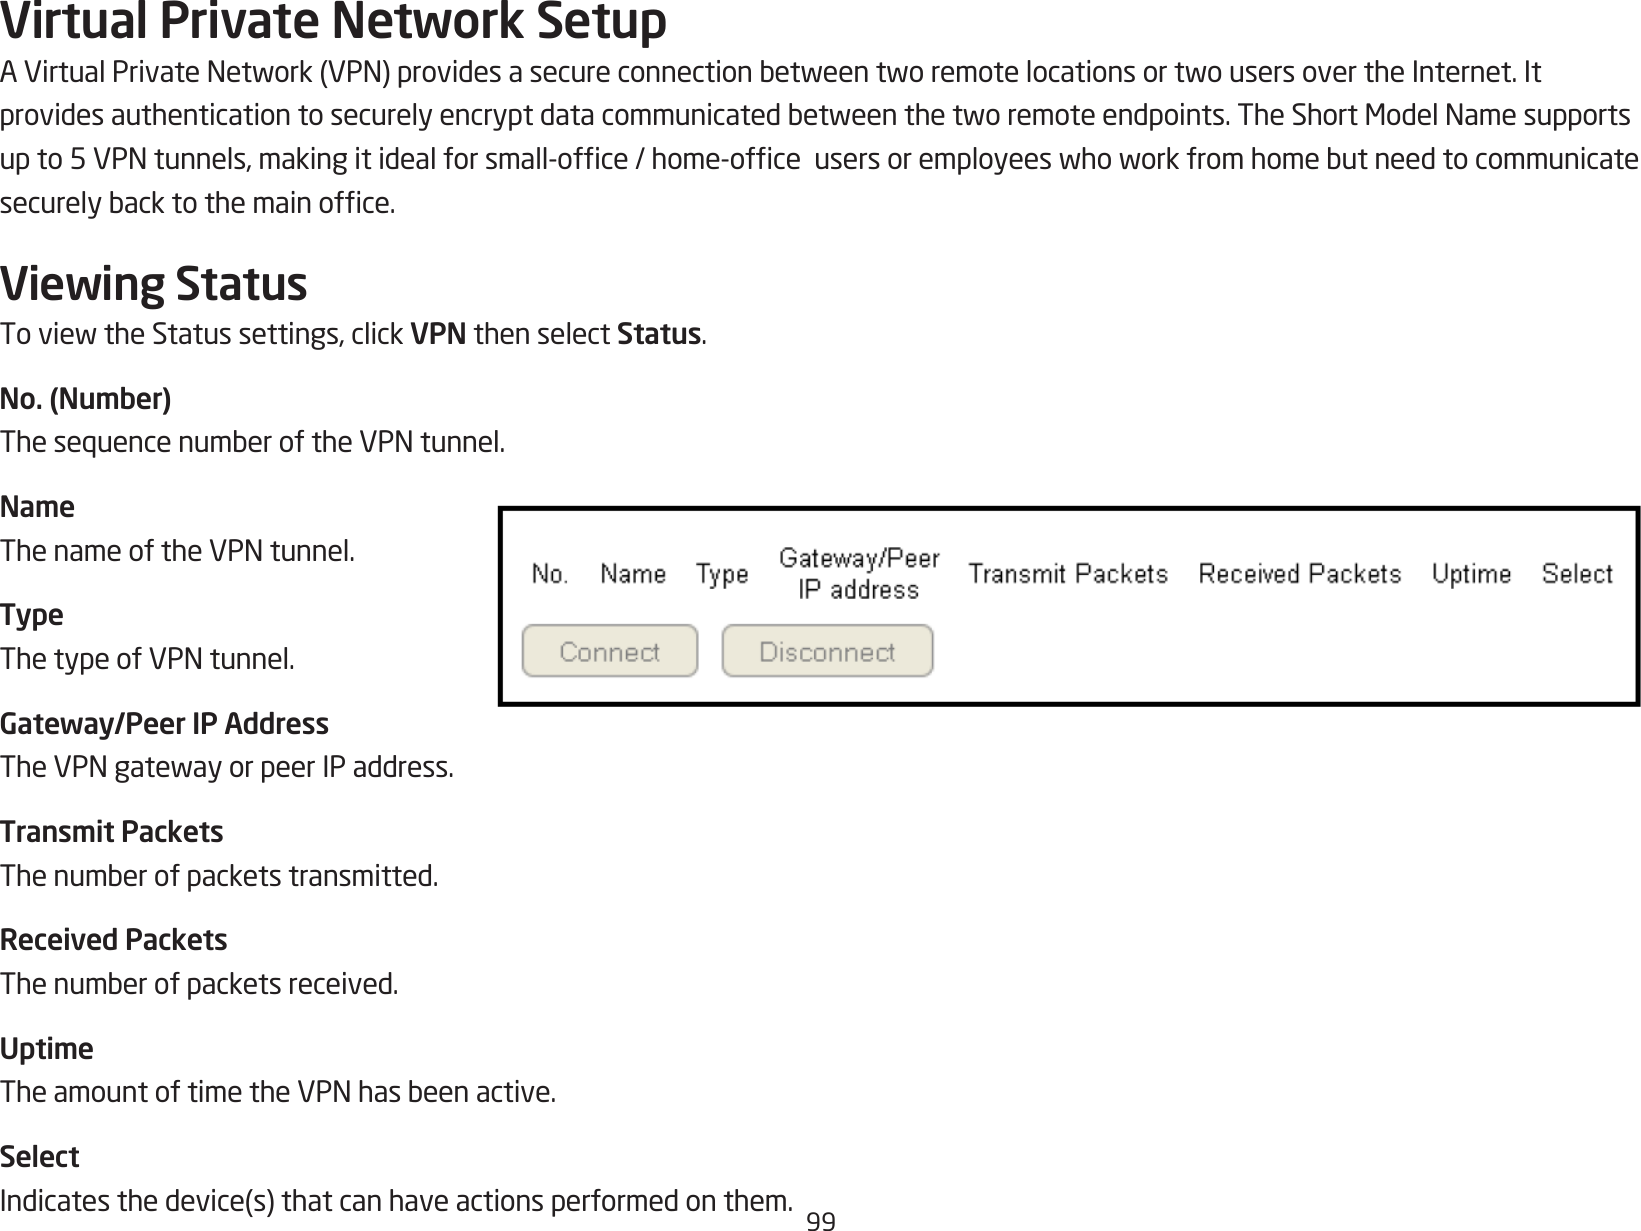 99Virtual Private Network SetupAVirtualPrivateNetwork(VPN)providesasecureconnectionbetweentworemotelocationsortwousersovertheInternet.Itprovidesauthenticationtosecurelyencryptdatacommunicatedbetweenthetworemoteendpoints.TheShortModelNamesupportsupto5VPNtunnels,makingitidealforsmall-ofce/home-ofceusersoremployeeswhoworkfromhomebutneedtocommunicatesecurelybacktothemainofce.Viewing StatusToviewtheStatussettings,clickVPN then select Status.No. (Number)ThesequencenumberoftheVPNtunnel.NameThenameoftheVPNtunnel.TypeThetypeofVPNtunnel.Gateway/Peer IP AddressTheVPNgatewayorpeerIPaddress.Transmit PacketsThenumberofpacketstransmitted.Received PacketsThenumberofpacketsreceived.UptimeTheamountoftimetheVPNhasbeenactive.SelectIndicatesthedevice(s)thatcanhaveactionsperformedonthem.